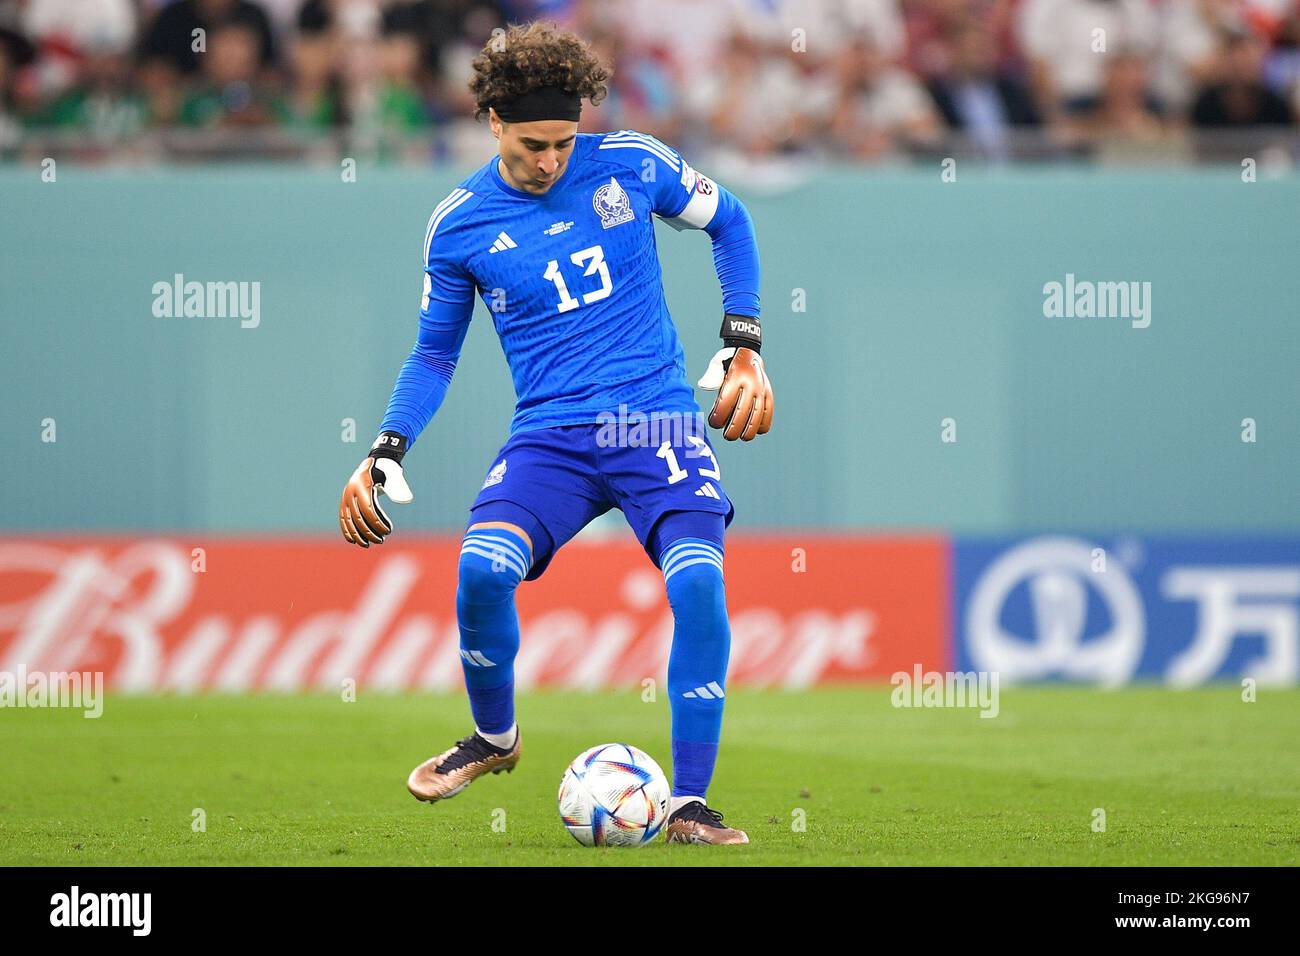 DOHA, QATAR - NOVEMBER 22: Guillermo Ochoa of Mexico passes the ball during the Group C - FIFA World Cup Qatar 2022 match between Mexico and Poland at Stadium 974 on November 22, 2022 in Doha, Qatar (Photo by Pablo Morano/BSR Agency) Credit: BSR Agency/Alamy Live News Stock Photo